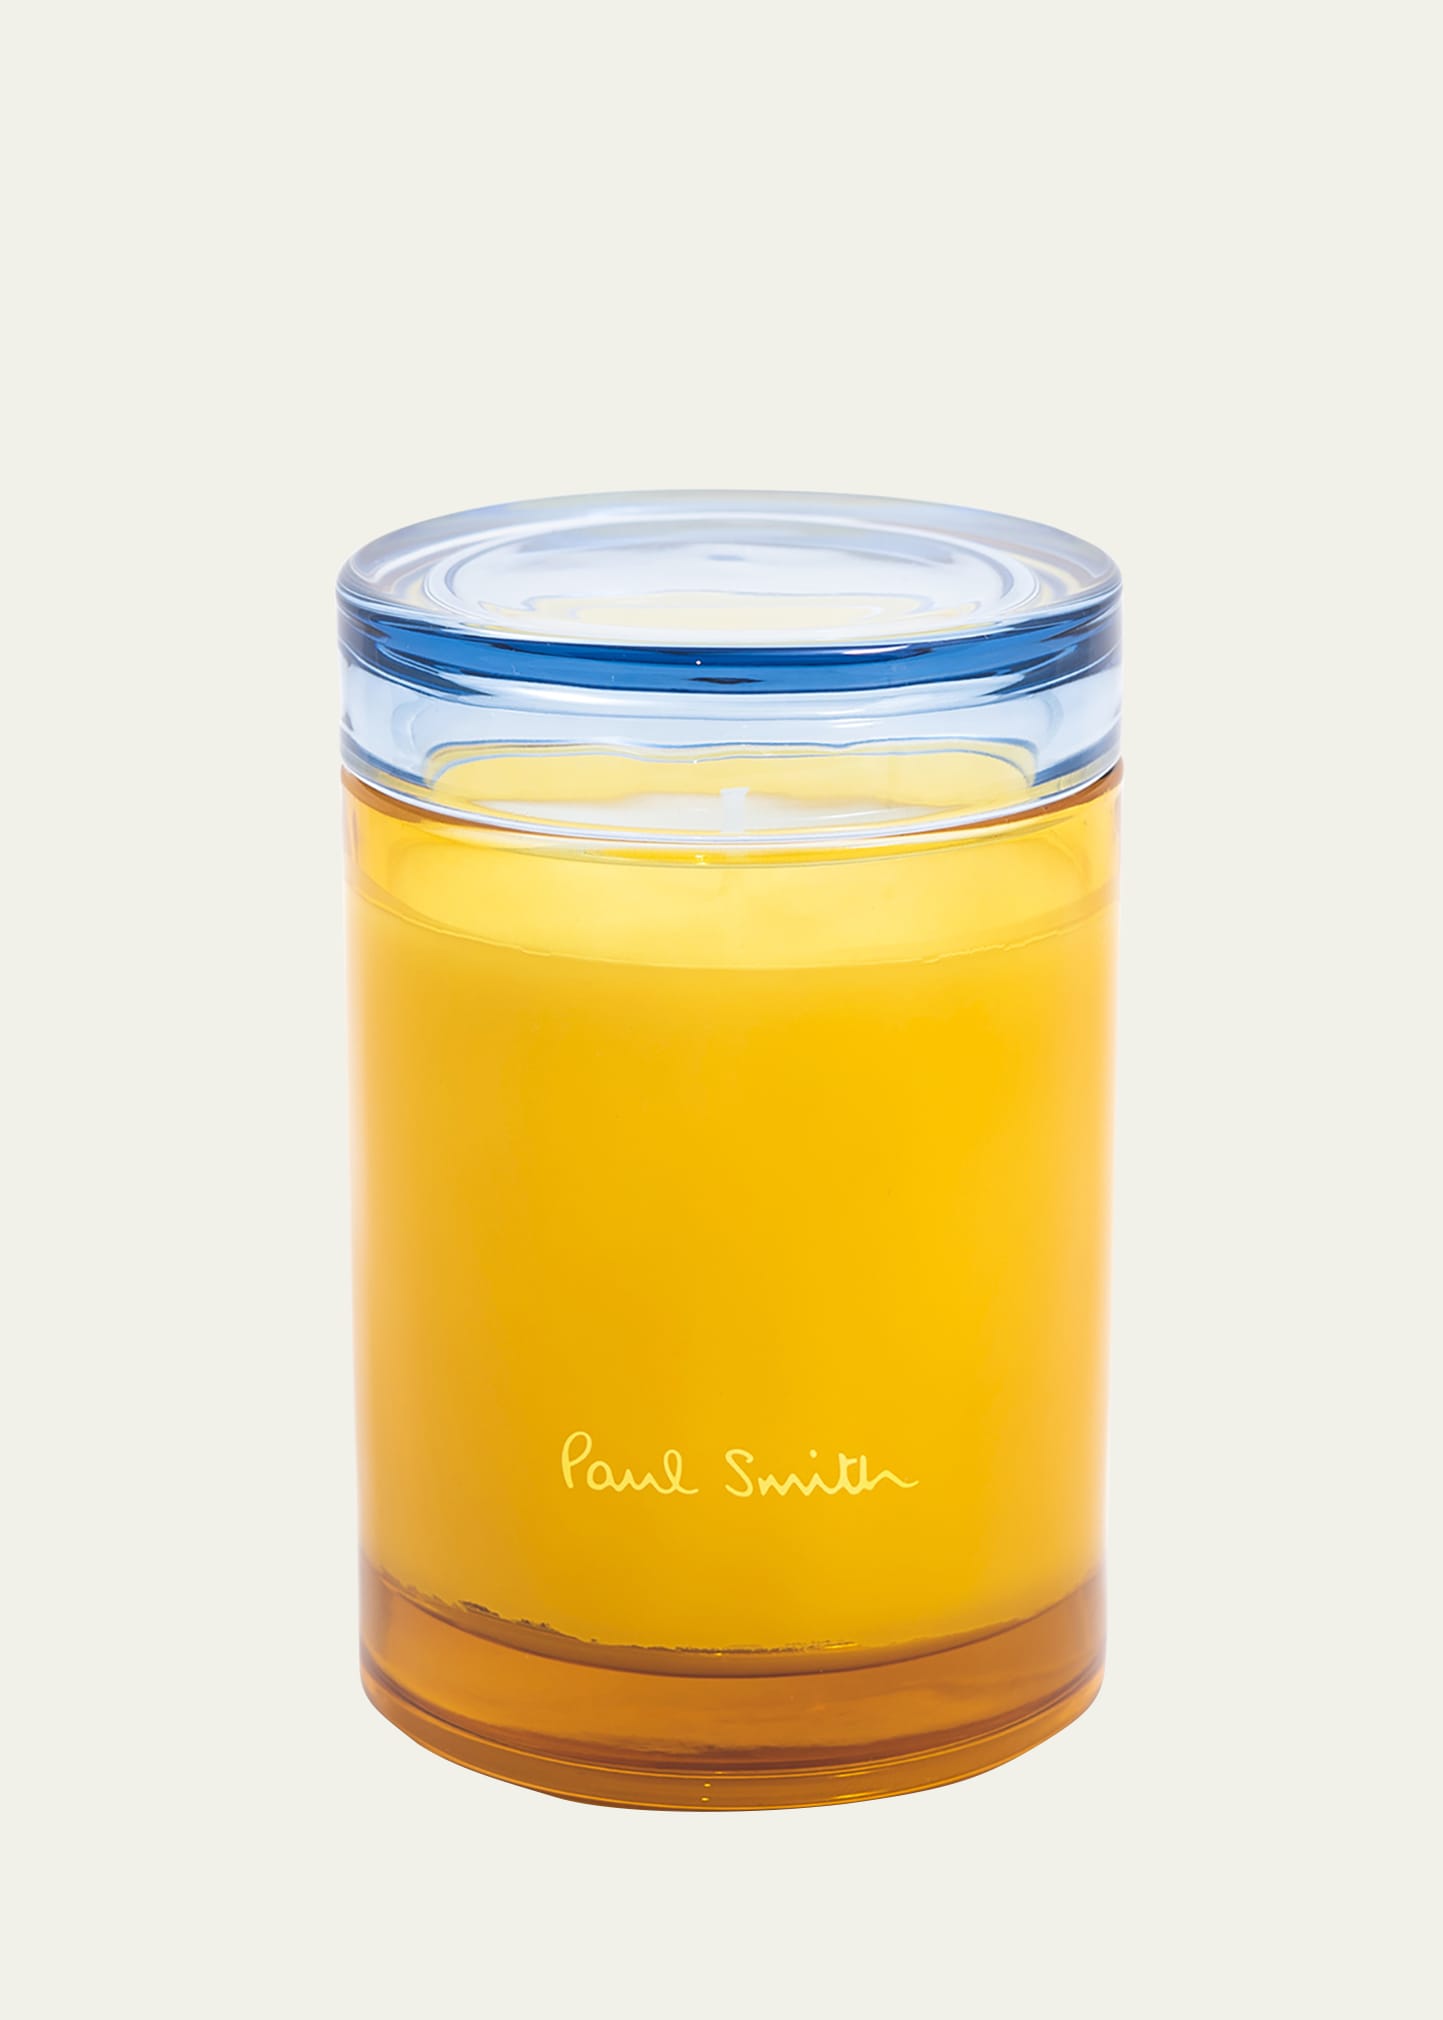 Paul Smith 8.4 Oz. Day Dreamer Candle